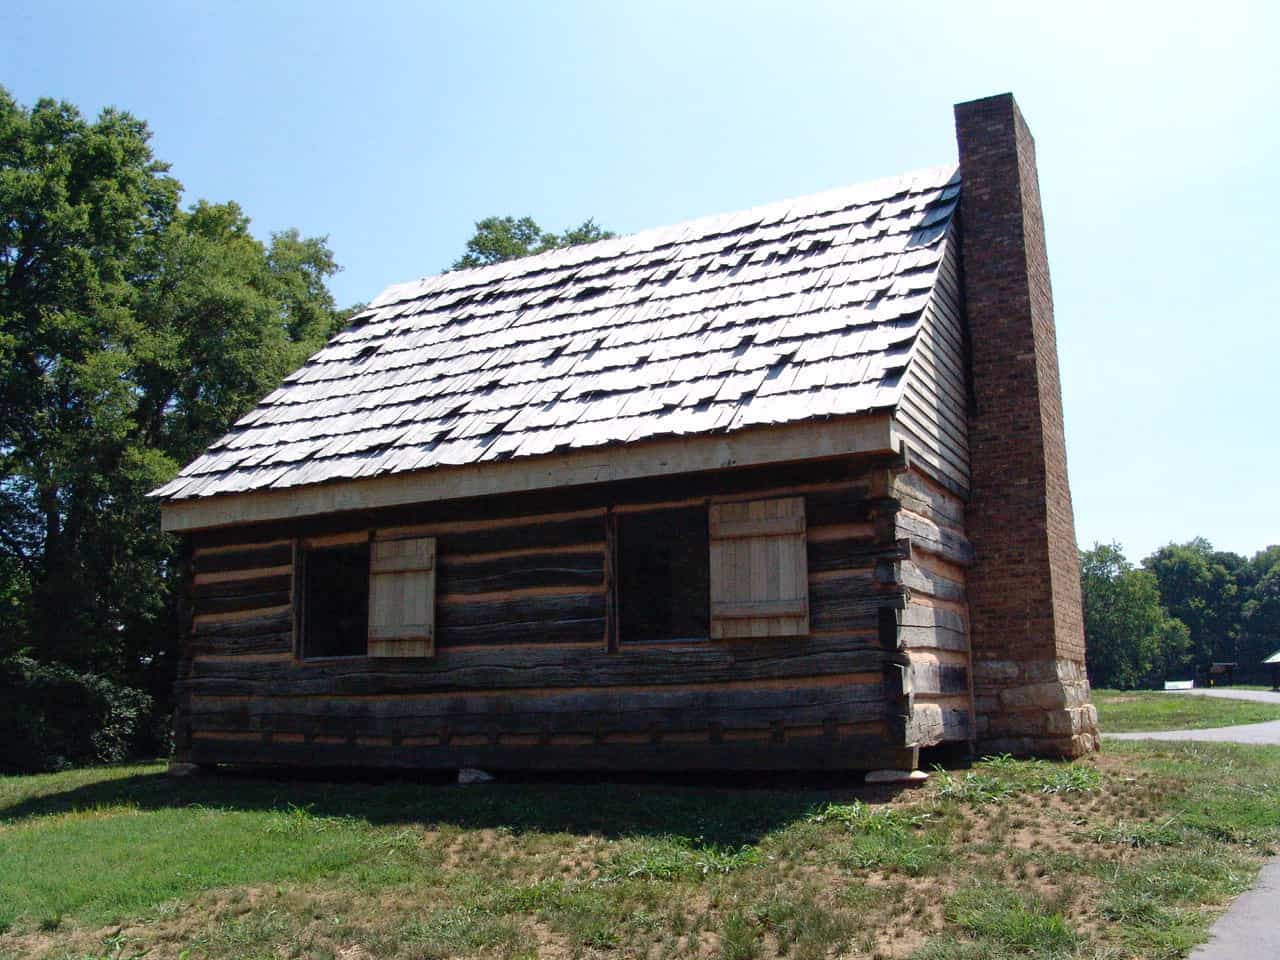 Slave cabin at The Hermitage in Nashville, Tennessee